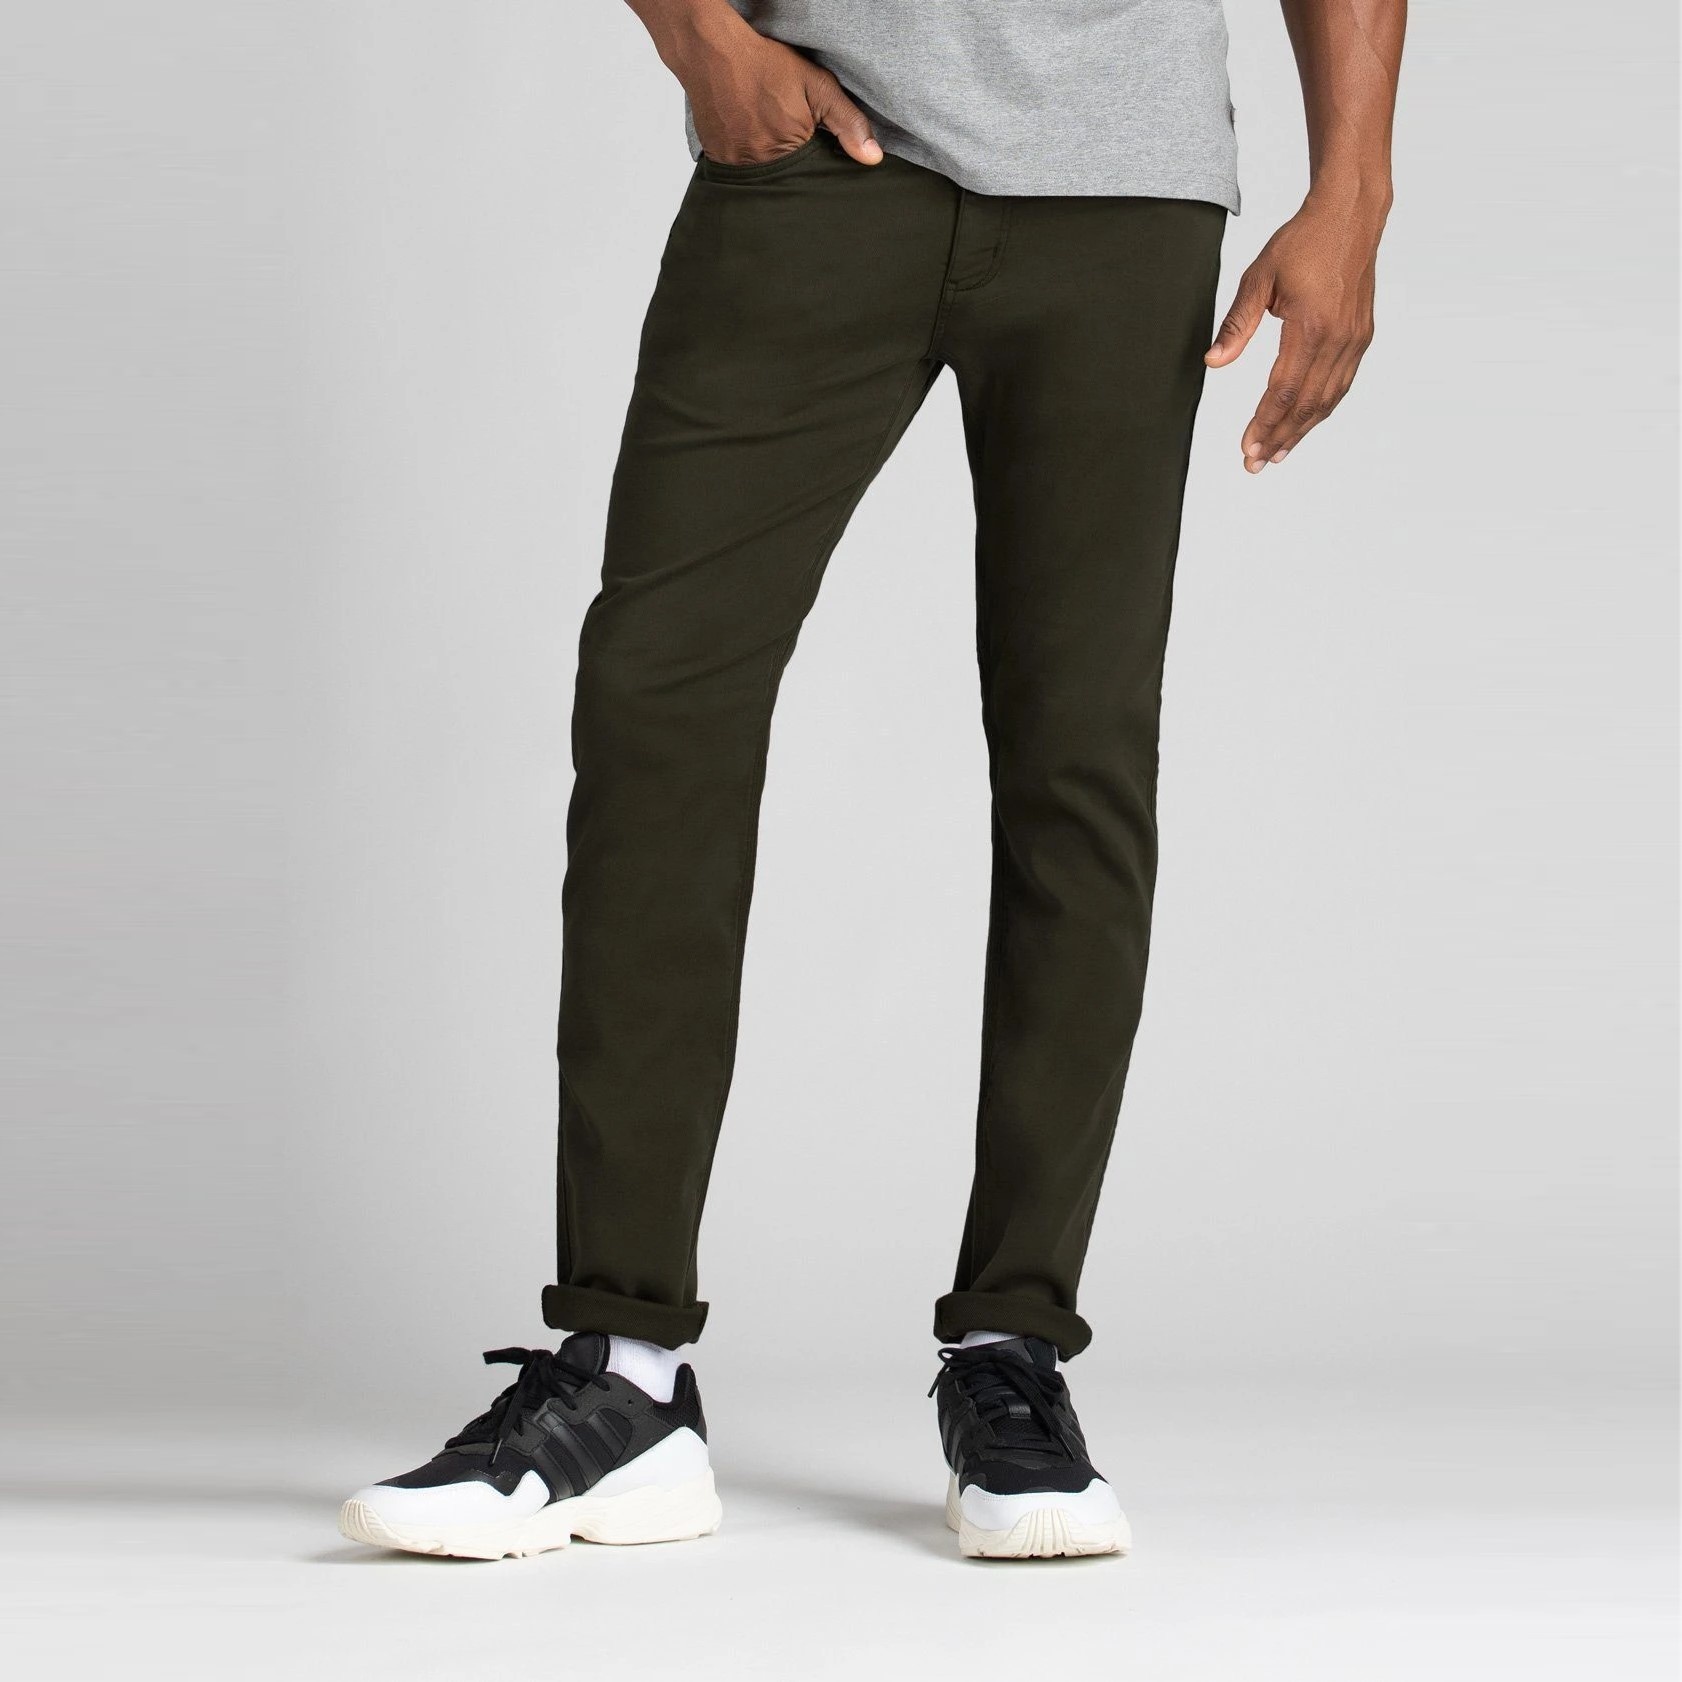 No Sweat Pant Relaxed - Coast Outdoors